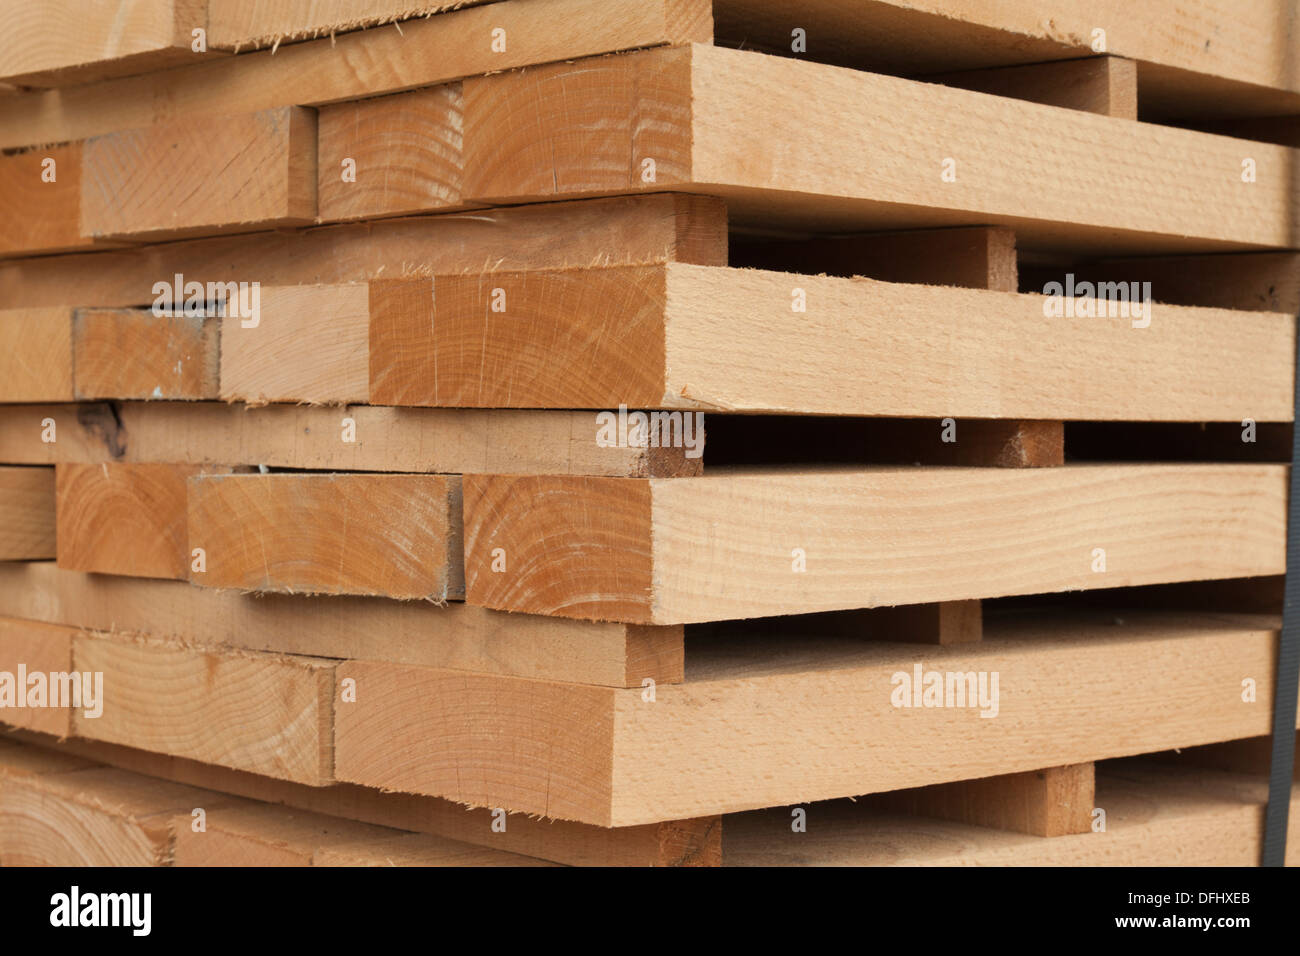 wooden beams stacked and processed Stock Photo